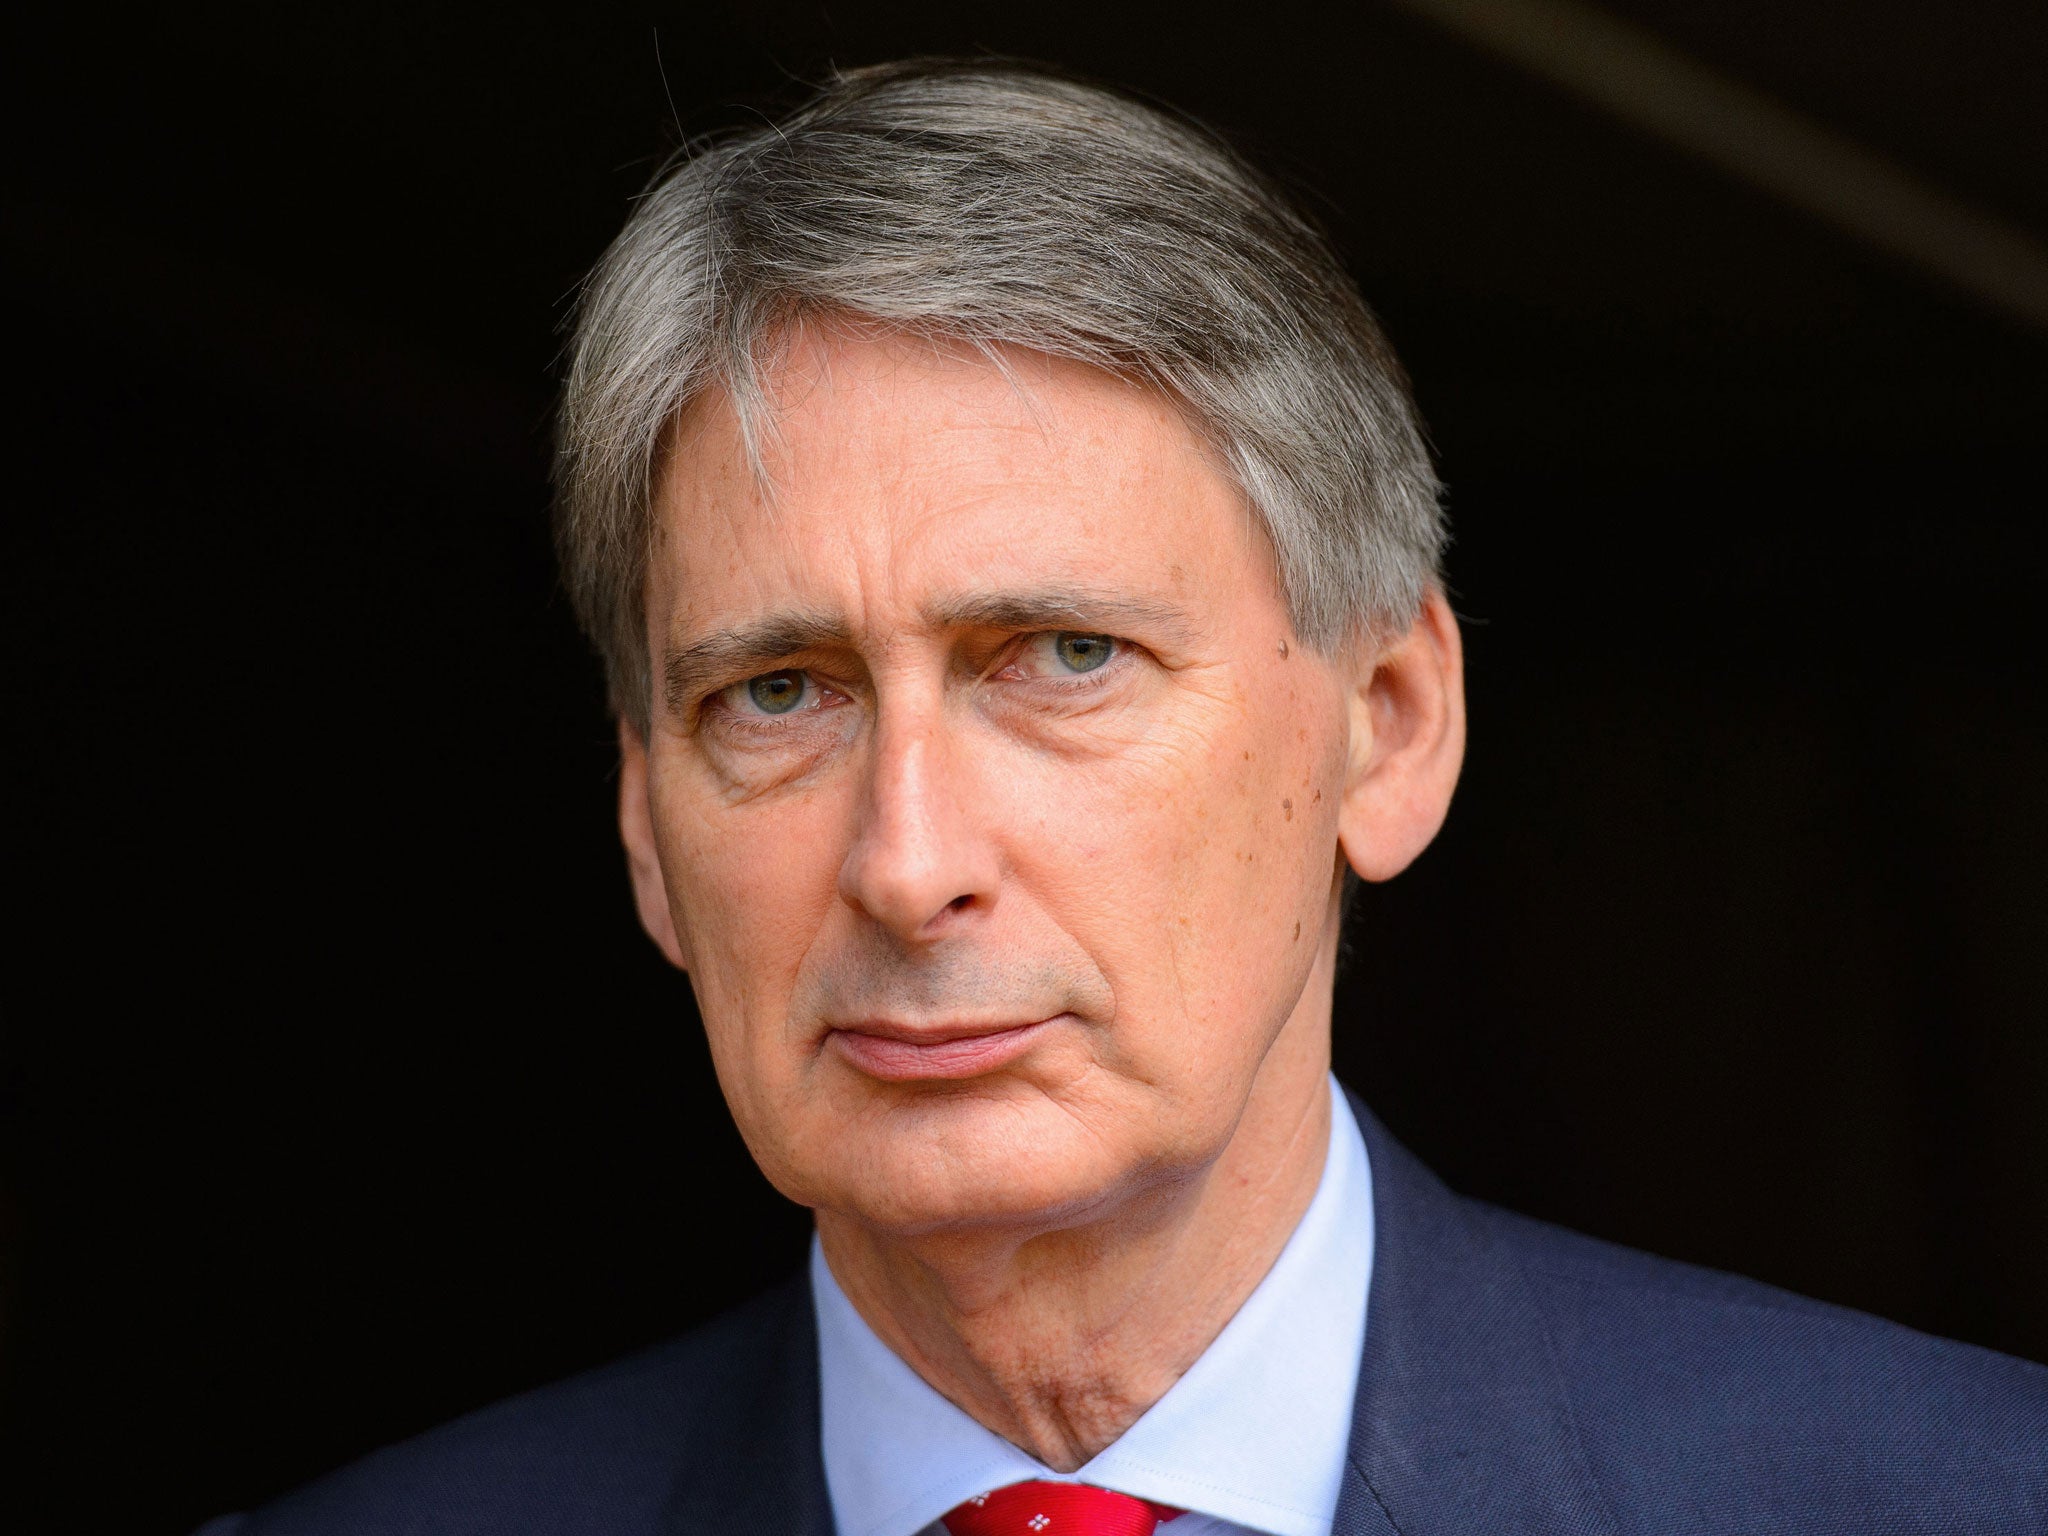 Defence Secretary Philip Hammond would not take the pay rise and suggested cabinet colleagues would follow suit